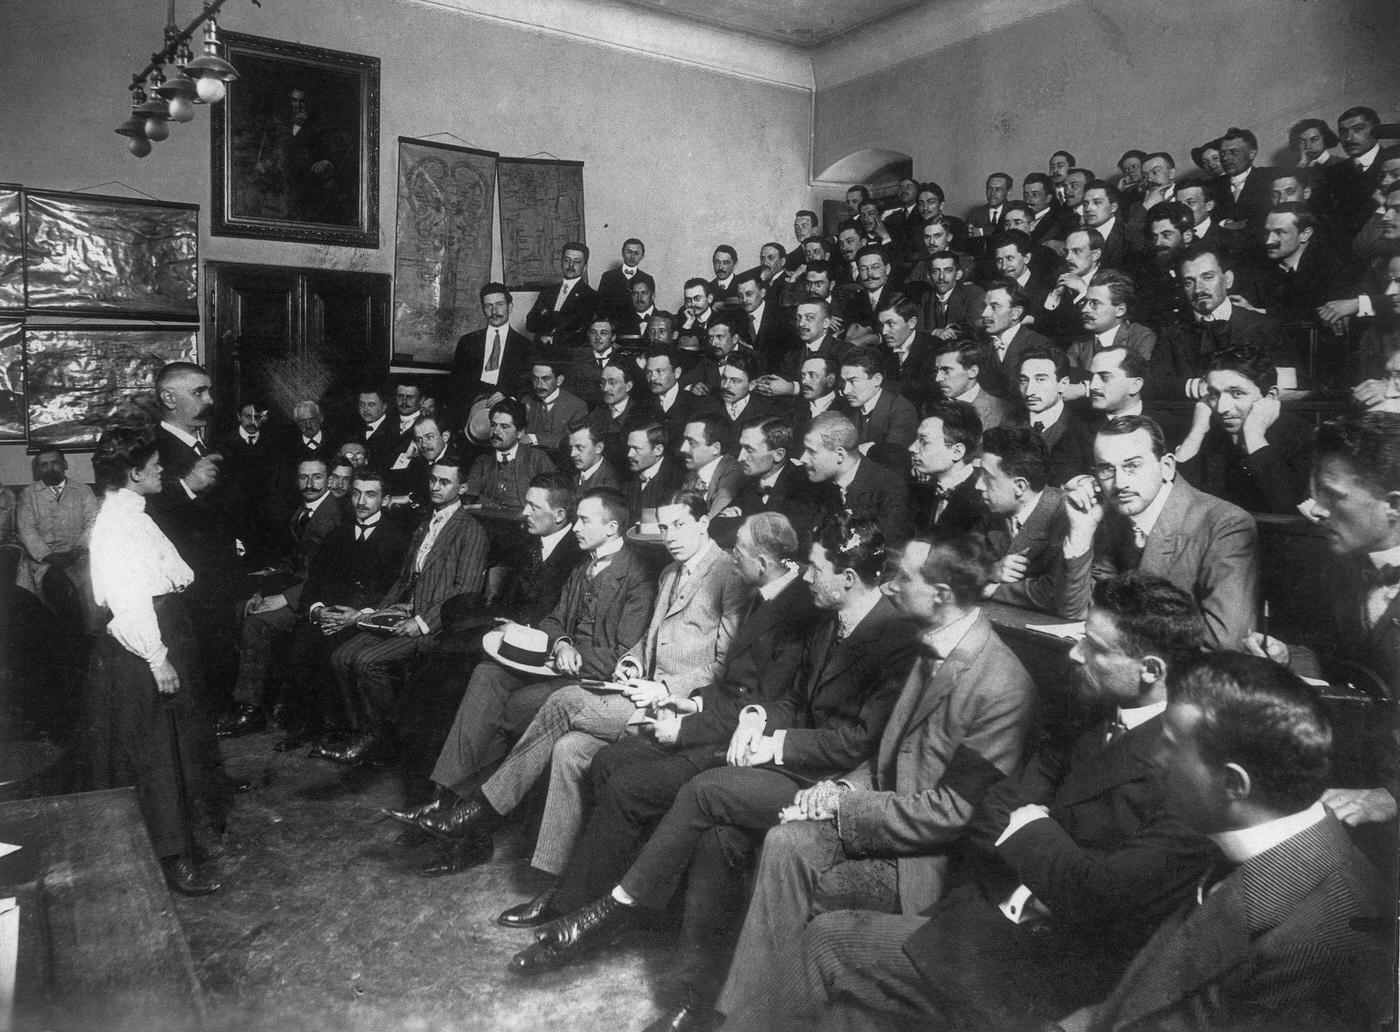 Auditorium filled with students at a lecture of Julius Wagner-Jauregg, physician and psychiatrist, who became famous for his treatment of mental disease by inducing a fever, which earned him the Nobel Prize in Medicine in 1927, Vienna, Around 1900s